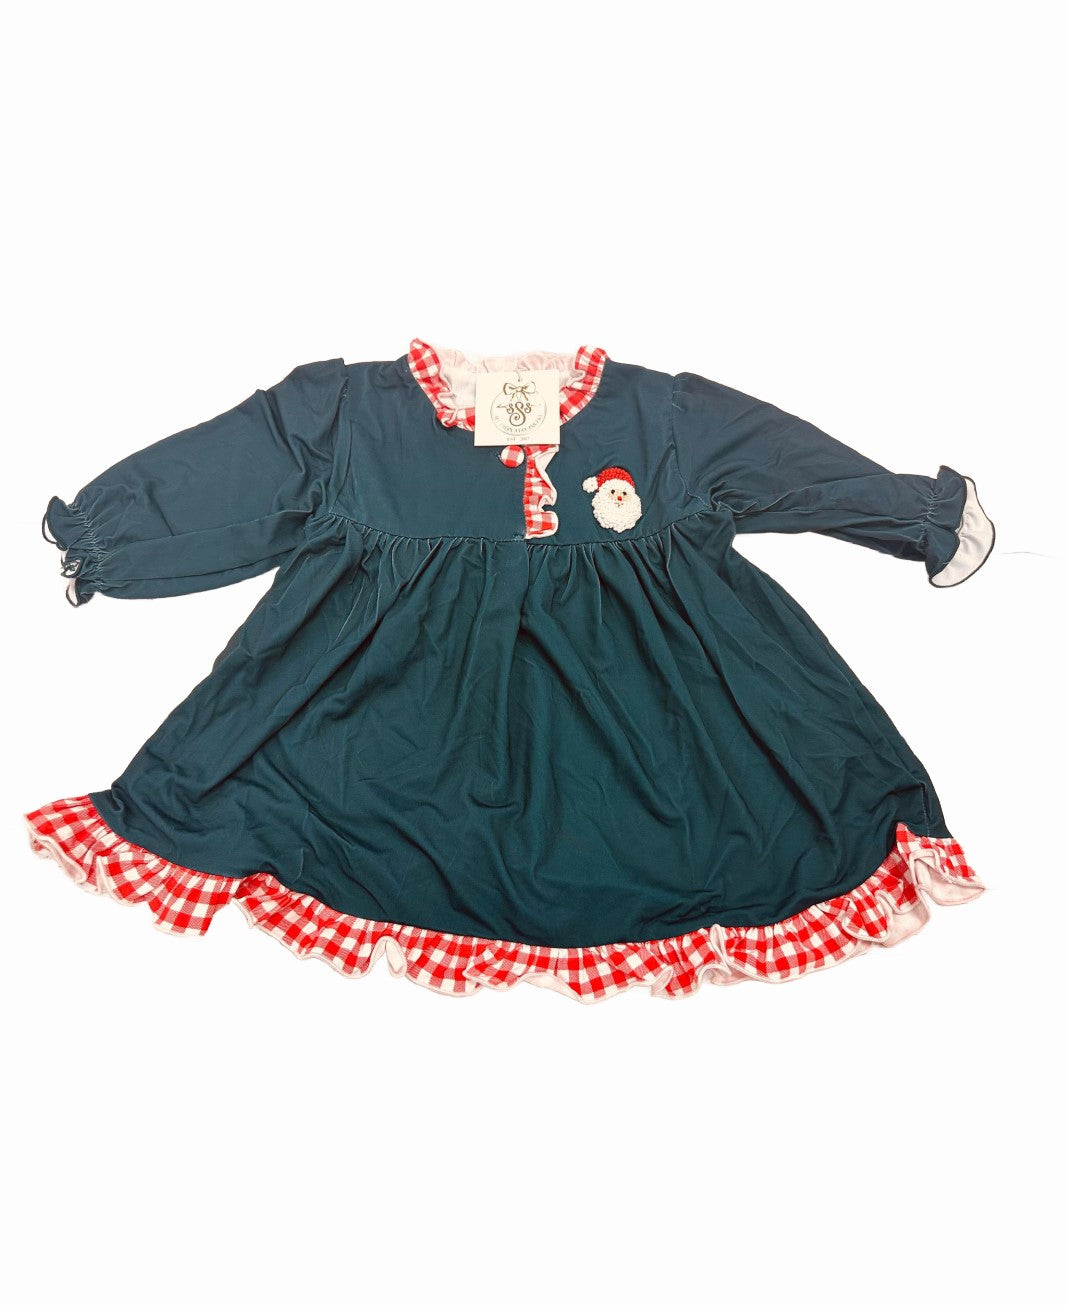 SANTA FRENCH KNOT NIGHTGOWN